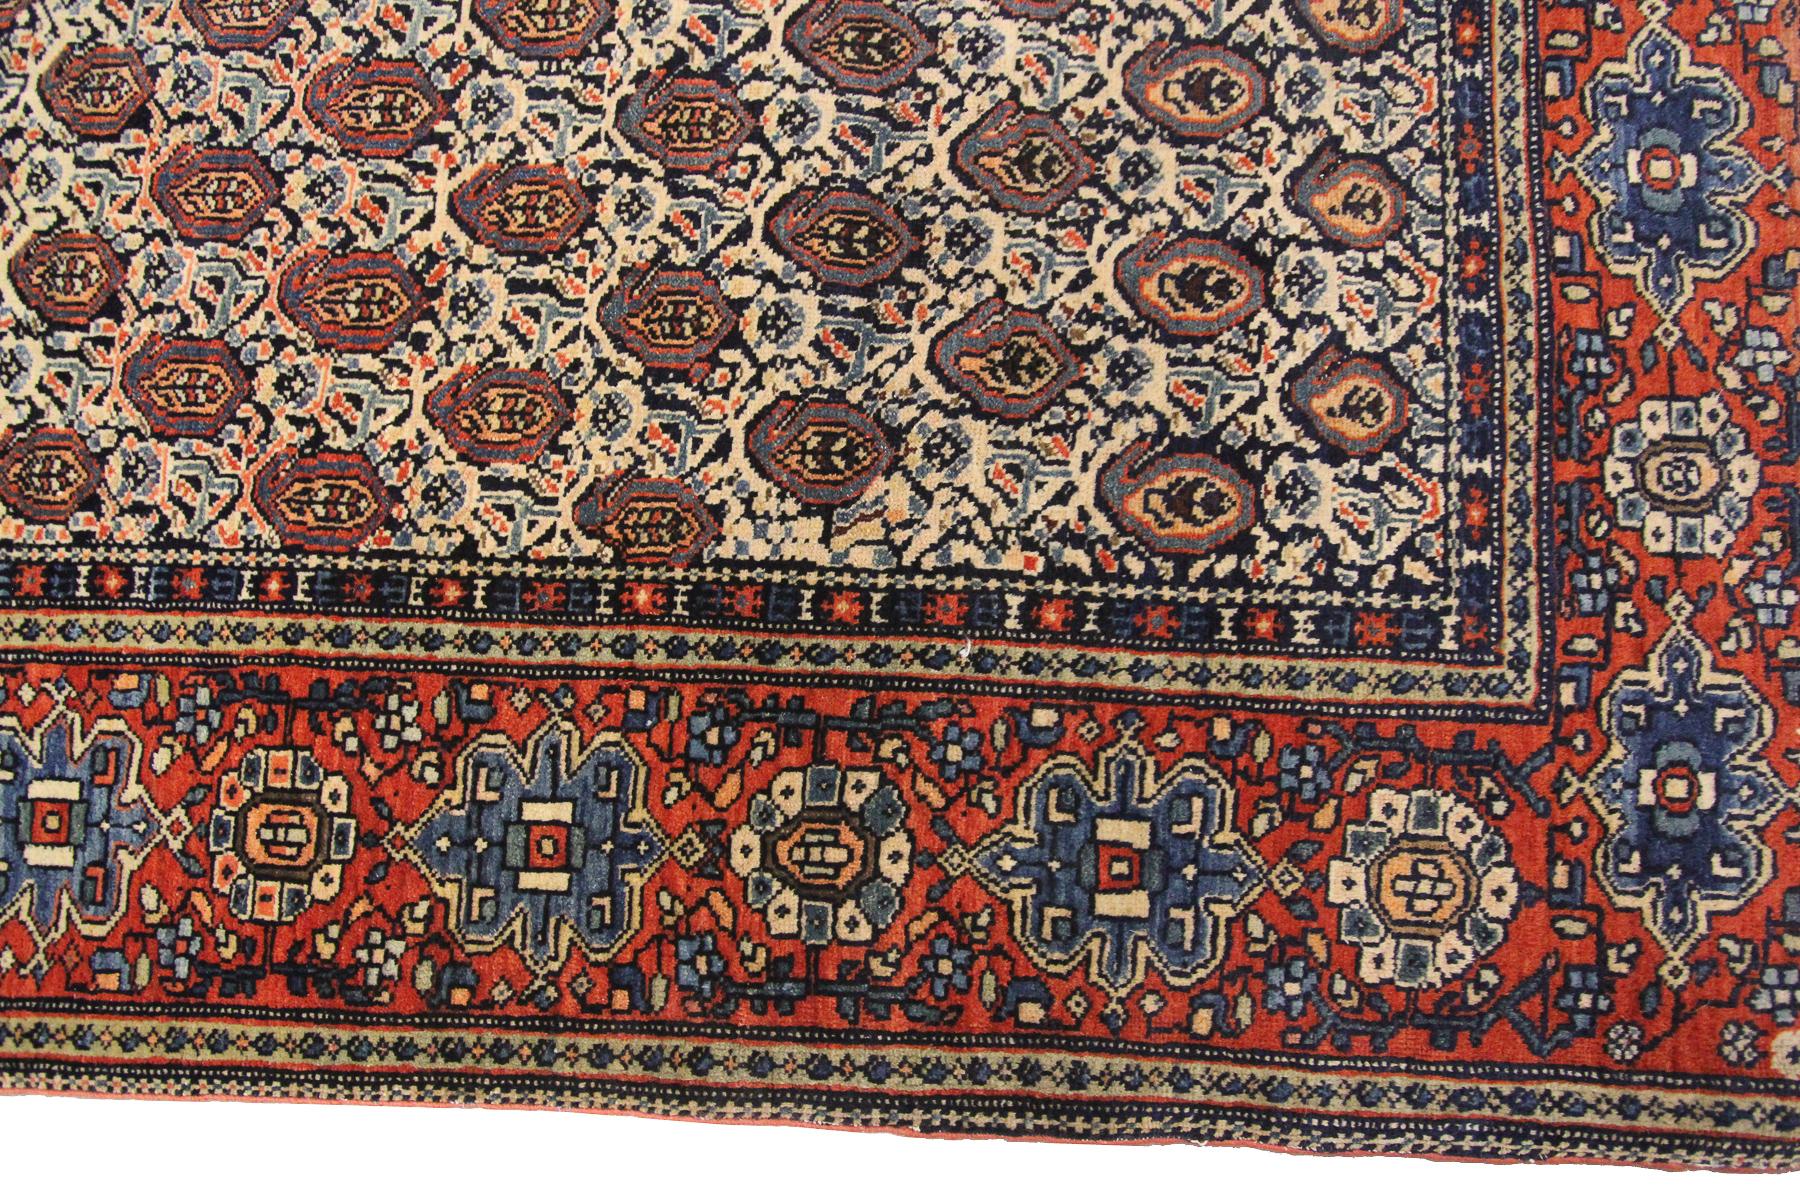 Late 19th Century 1890 Antique Persian Rug Antique Persian Rug Sarouk Farahan Geometric Overall For Sale